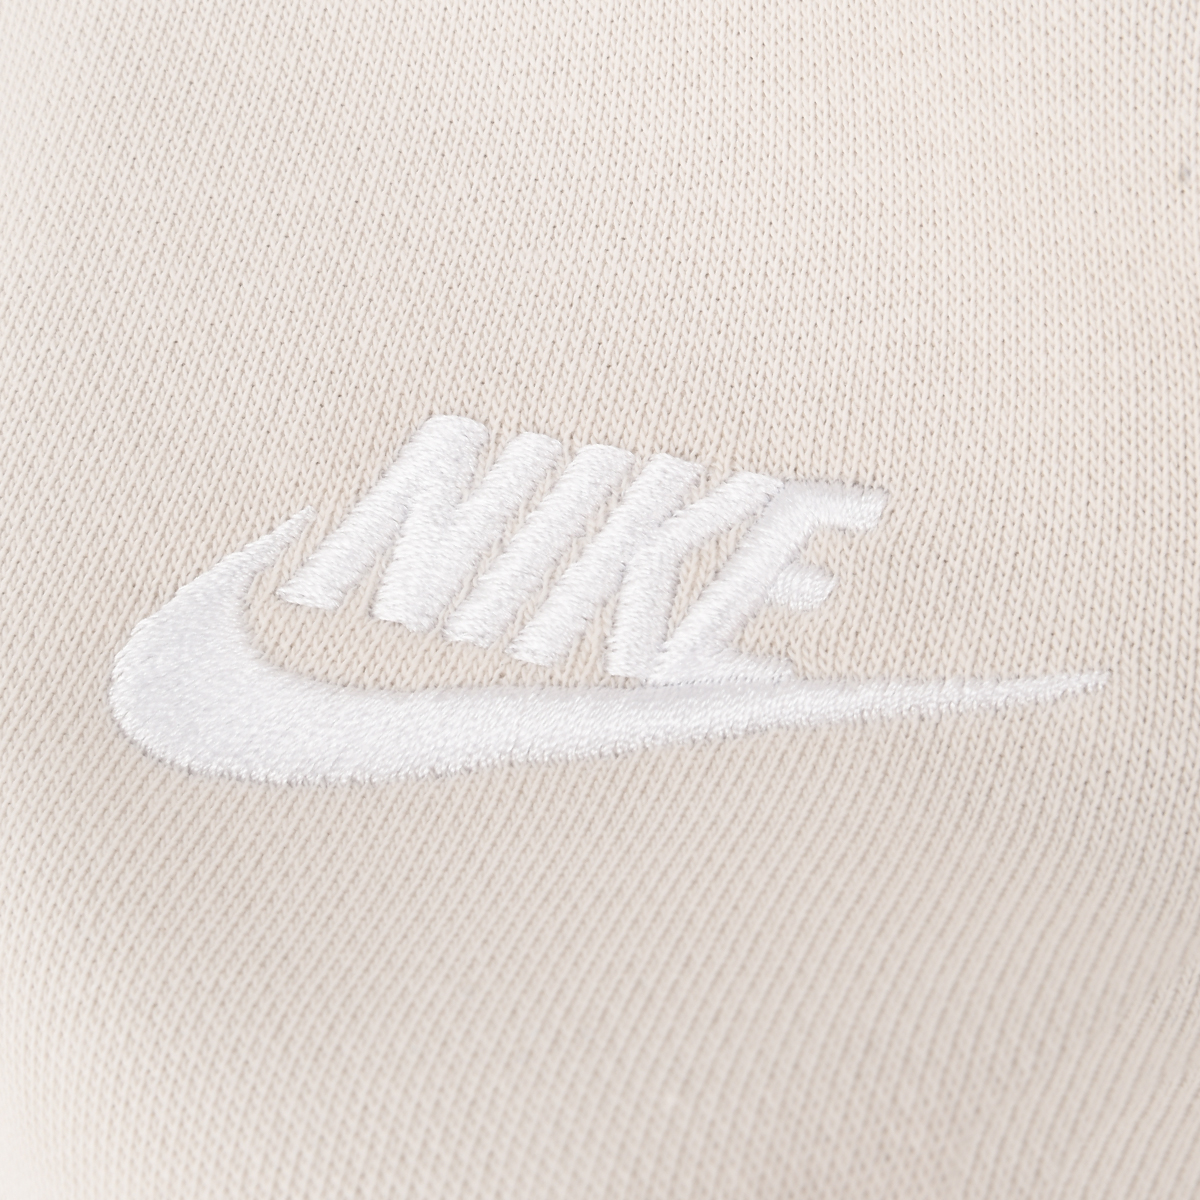 Campera Nike Sportswear Club Hombre,  image number null